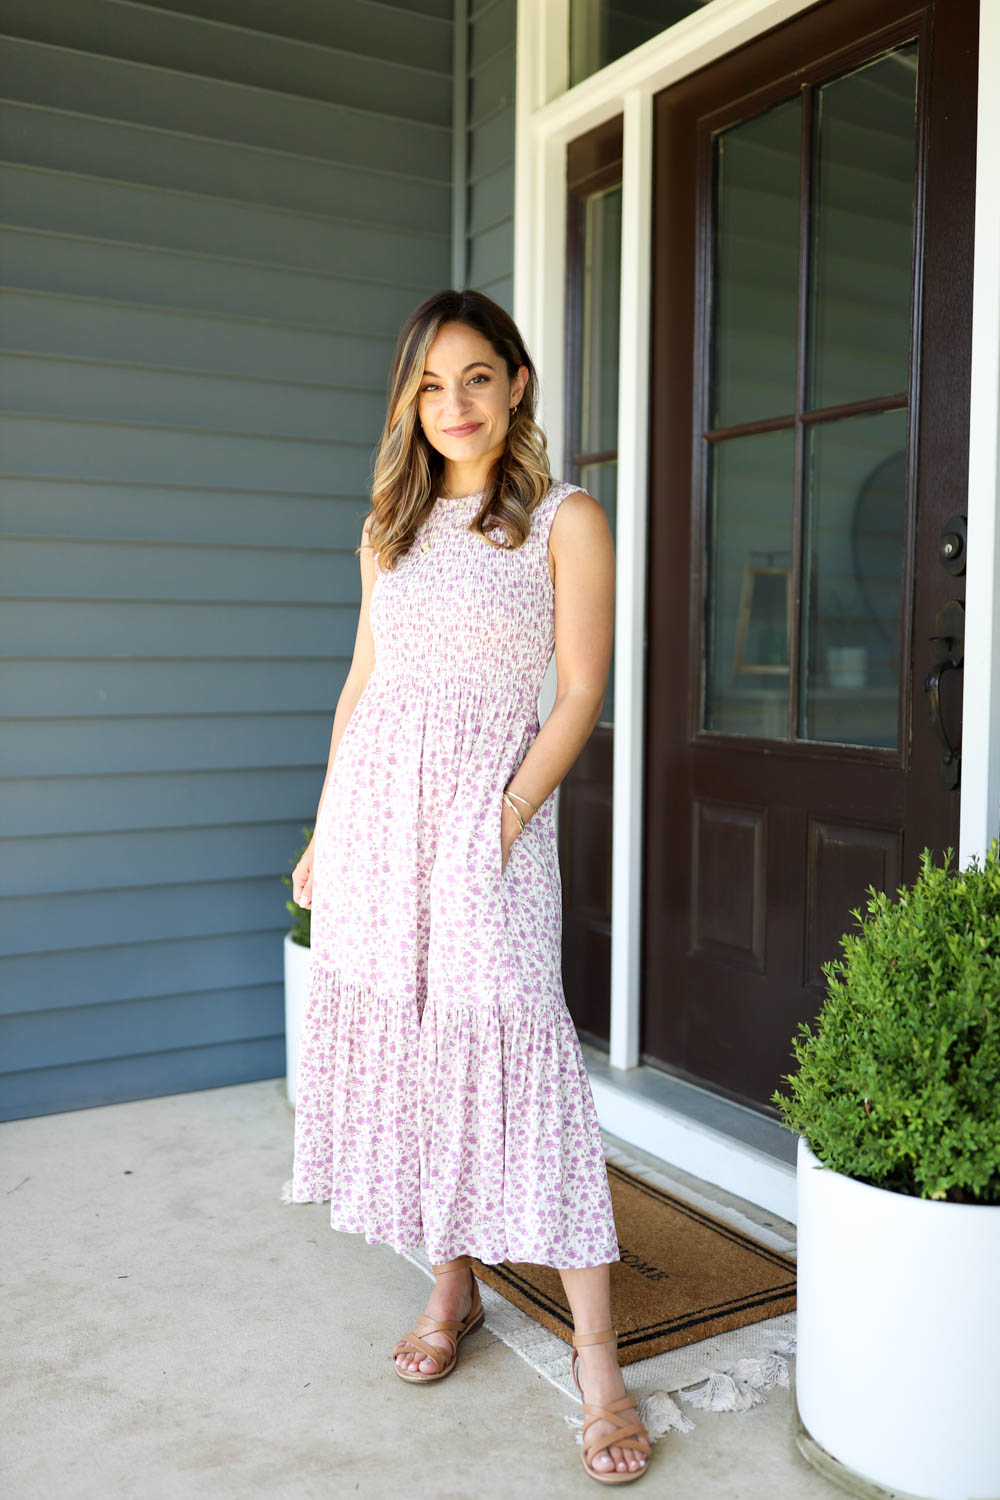 Summer Date Night Outfits Under $40 - Pumps & Push Ups